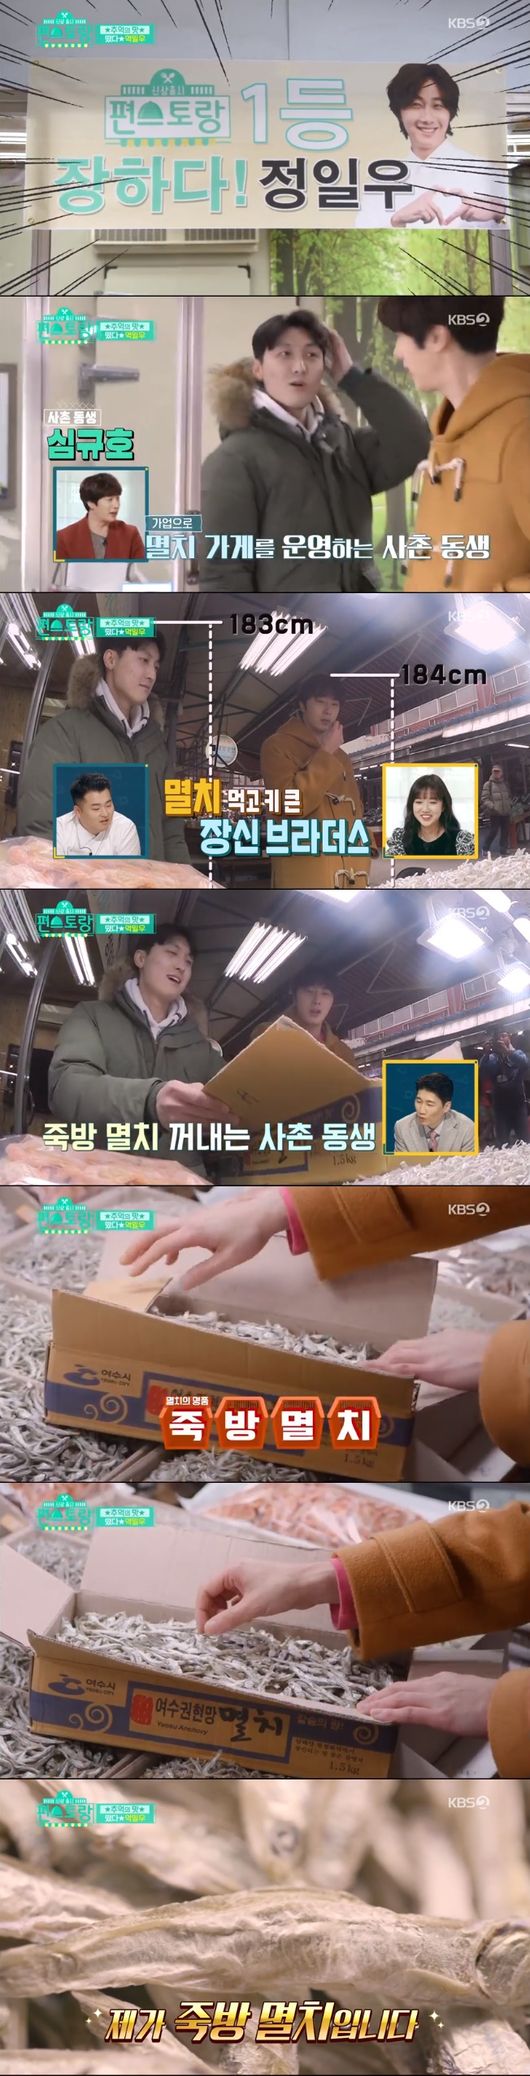 Stars Top Recipe at Fun-Staurant Jung Il-woo found a Sillim-dong Baeksundae house that he often ate with his girlfriend in high school.Jung Il-woo ordered the Sillim-dong Baeksundae to taste the memories of the theme on KBS Stars Top Recipe at Fun-Staurant broadcast on the afternoon of the 17th.The storm of the sun has begun to overshadow the words of Do not you have a lot of sheep?I did a lot of Date here, he said, who is it? And in high school, he replied.Jung Il-woo said, I first met Lee Min-ho in high school and I knew it was like a dream about acting and quickly became close.Lee Min-ho is the only celebrity friend who is now my best friend. Jung Il-woo laughed, I do not recognize handsome people. After eating Baek Soondae, his cousin, who is working for the market, headed to the anchovy shop where he took over the family business.My cousins brother, who kept eating for anchovy, said, It is 1,000 won per one. I have to buy.I bought anchovies and put anchovies in the rice bowl instead of a snail, boiled a strong miso, and then changed pine nuts and peanuts, and Lee Jung-hyun praised his idea, saying that he would sue too much.I boiled auk, modern and cabbage, put anchovy sauce, wrapped it in a wrap, and packed a lunch box for someone.Ilwoo said that he had packed lunch for the first time in his life, and he was headed for a theater in Daehangno with such cheap rice.While the boom was so proposal that I should marry, Iwoo entered Lee Soon-jaes practice room while supporting Ilwoos love.Lee Soon-jae looked at Ilwoo and asked, What is that in your head? And Ilwoos head had a headband saying, I love you, Sunjae Sam.Two people who had a relationship with high kicks 13 years ago, Ilwoo framed a high kick photo taken from the photo studio and told Lee Soon-jae.Stars Top Recipe at Fun-Staurant You know? Its a program Im doing these days.Lee Soon-jae asked if he was going to turn into a business and laughed, Lets put some in there.Lee Soon-jae said, It tastes good? while eating a lunch box of Ilwoo, and Ilwoo was in color.KBS Stars Top Recipe at Fun-Staurant Broadcast Screen Capture